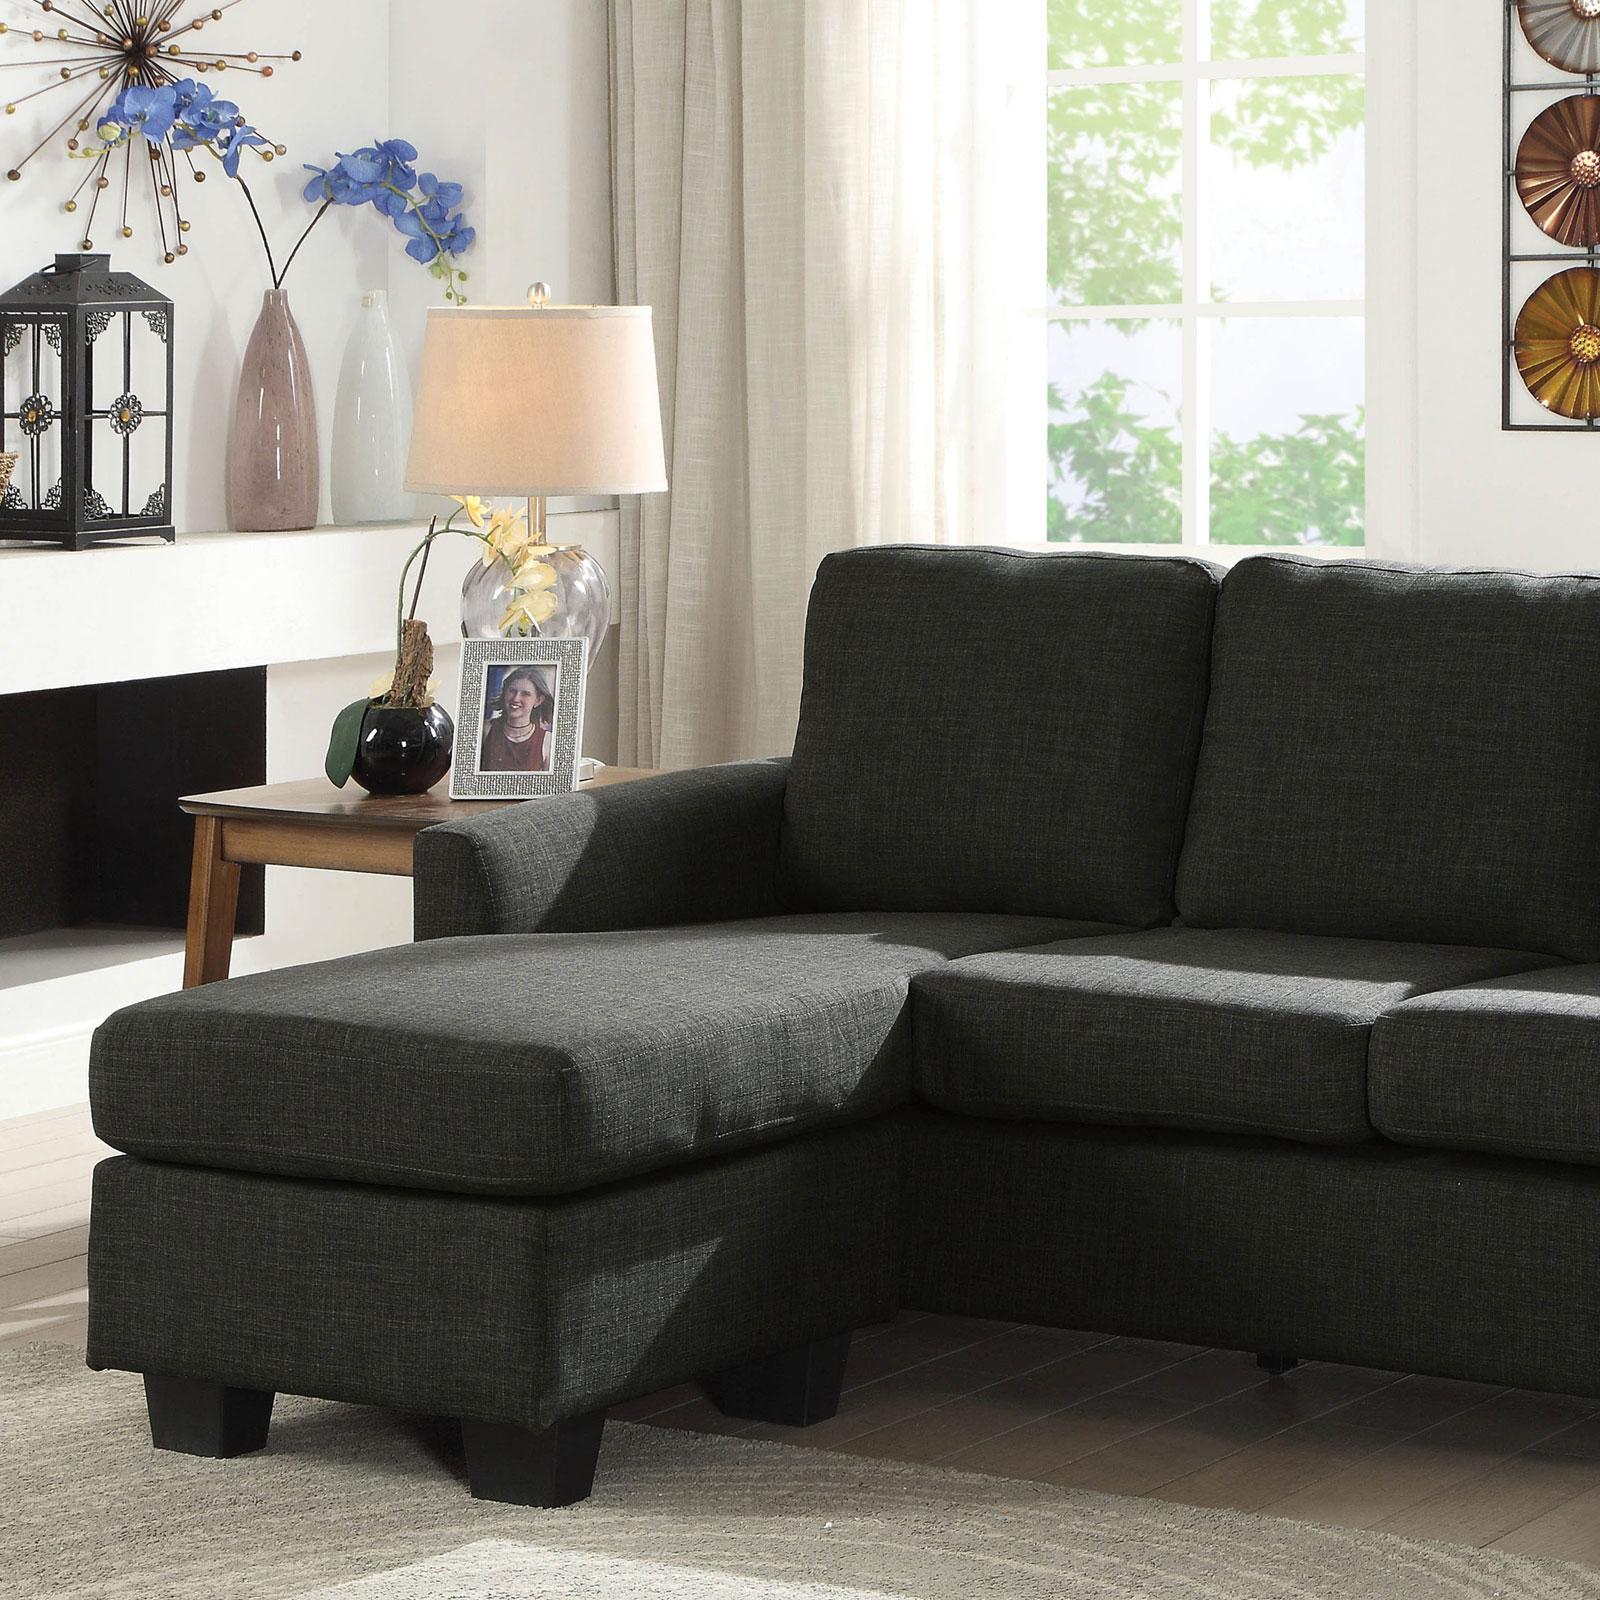 Transitional Sectional Sofa ERIN CM6593GY CM6593GY in Dark Gray 